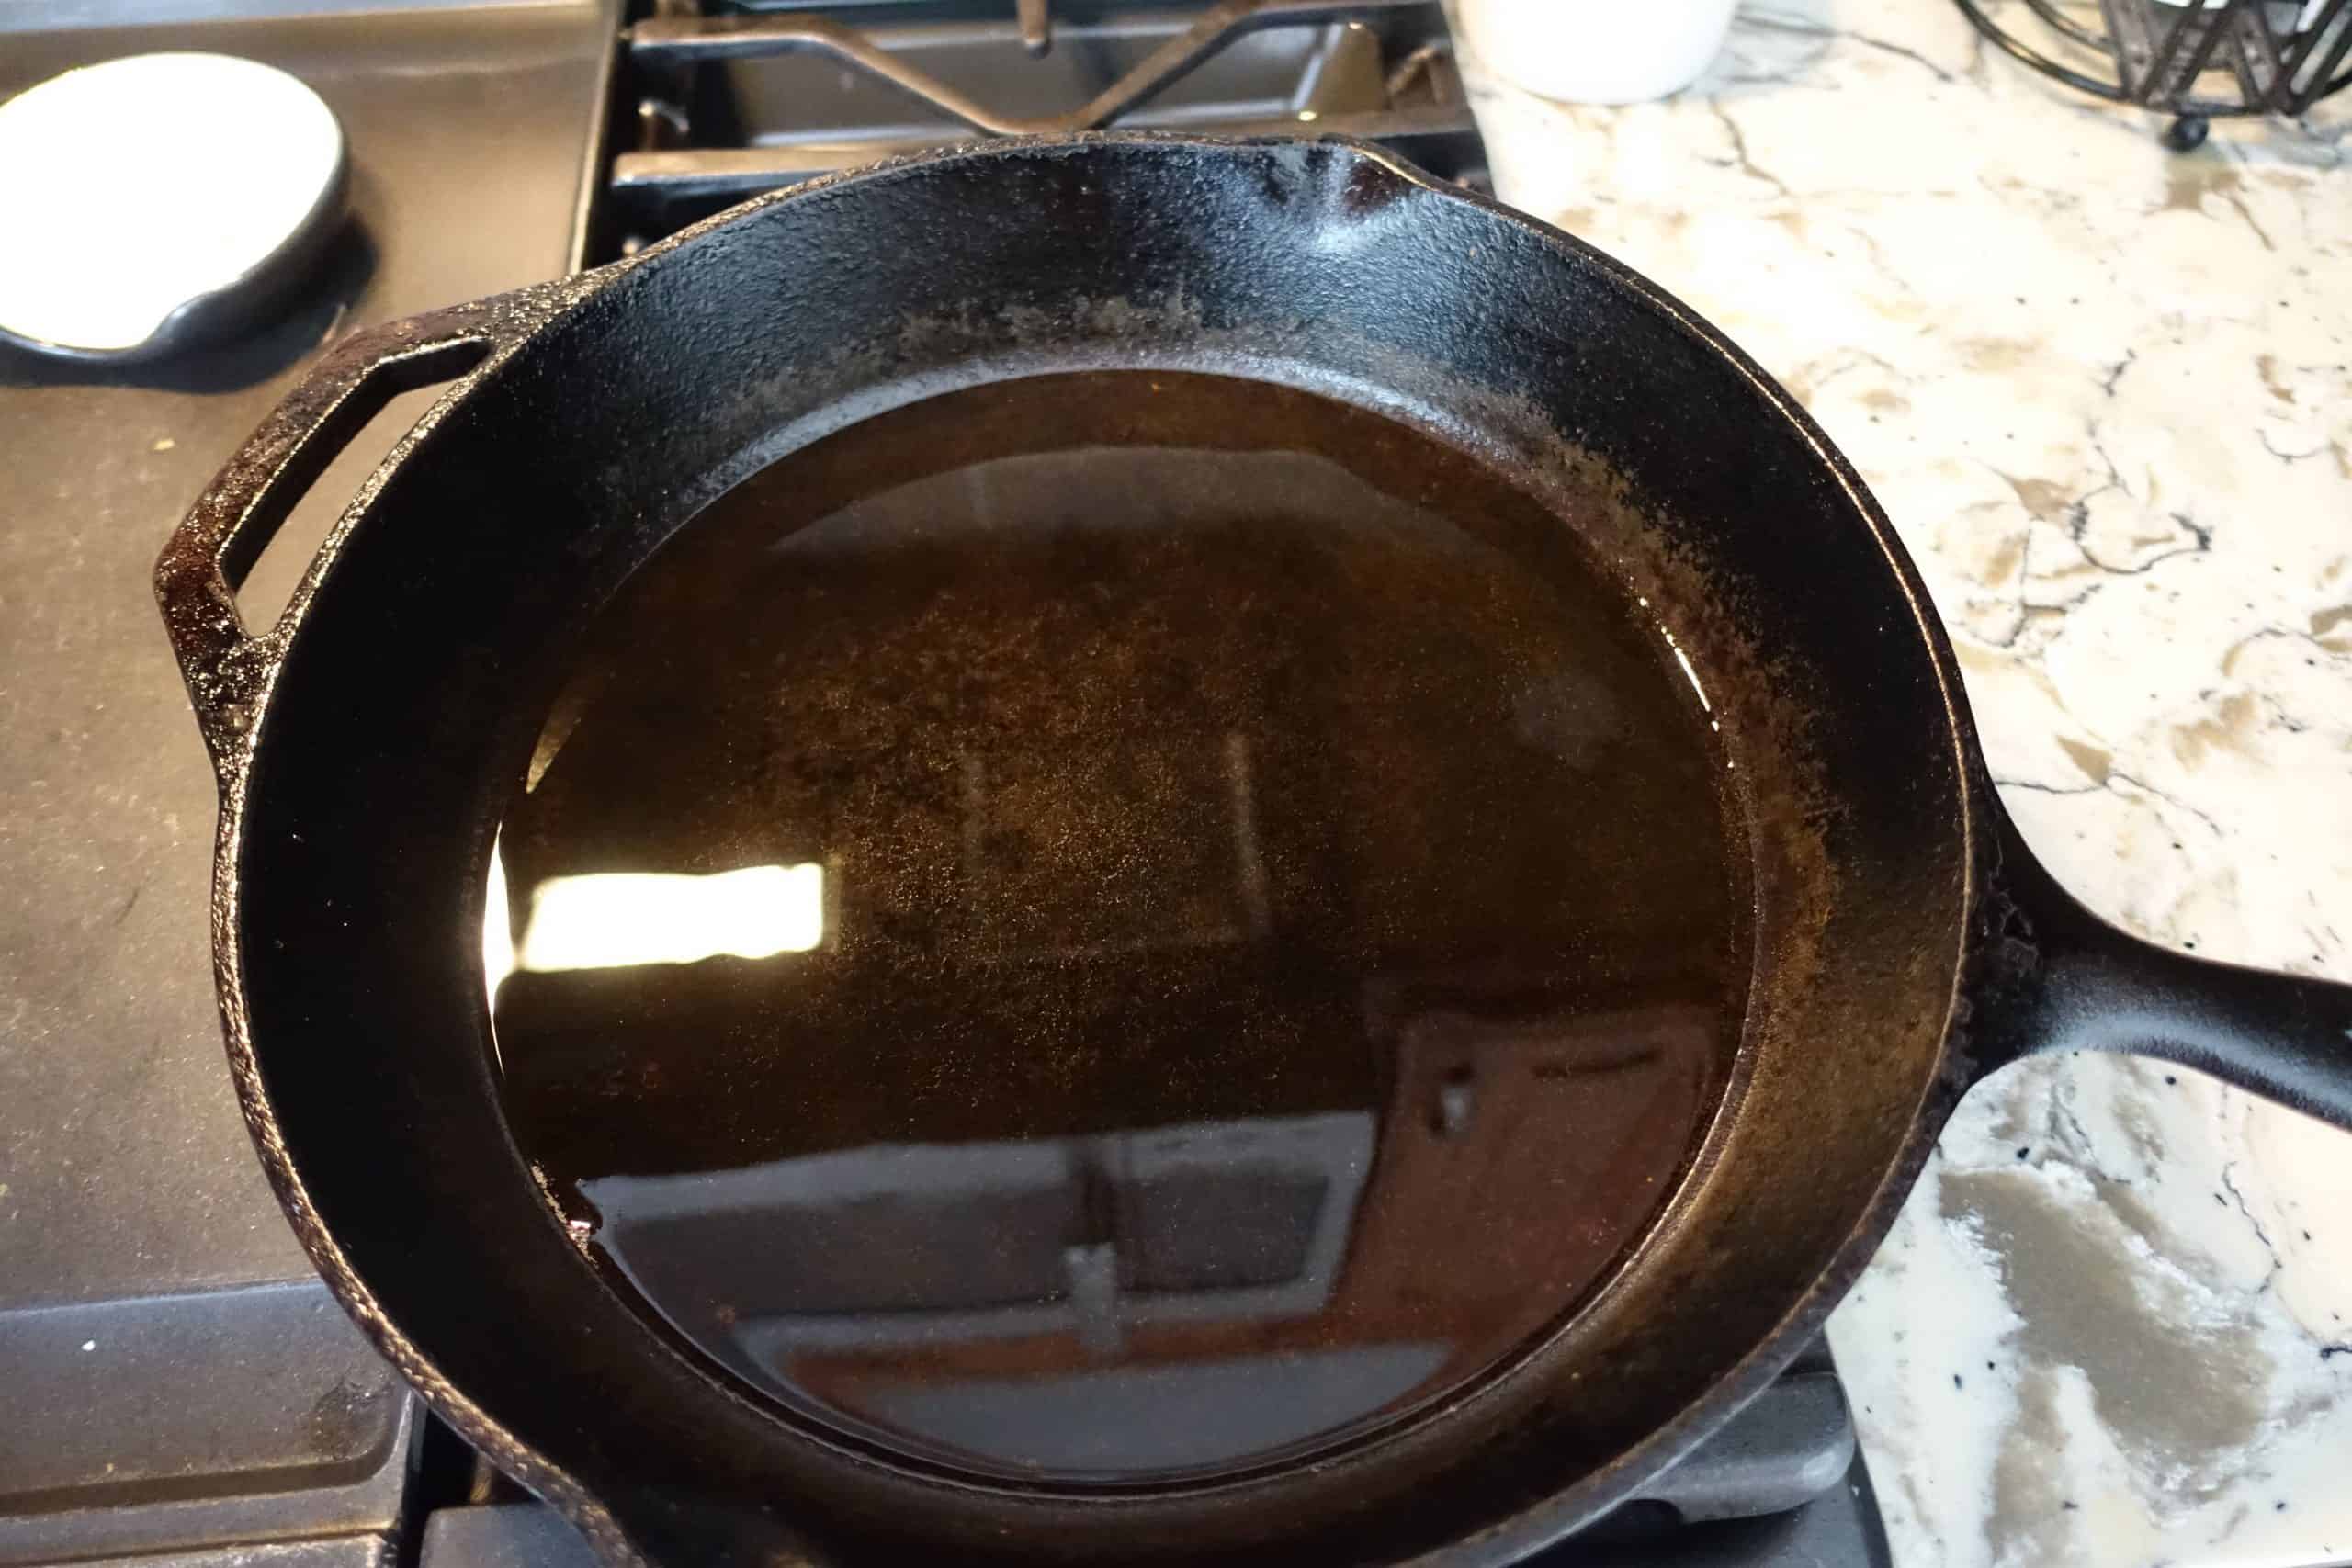 preheating oil in a well seasoned cast iron skillet